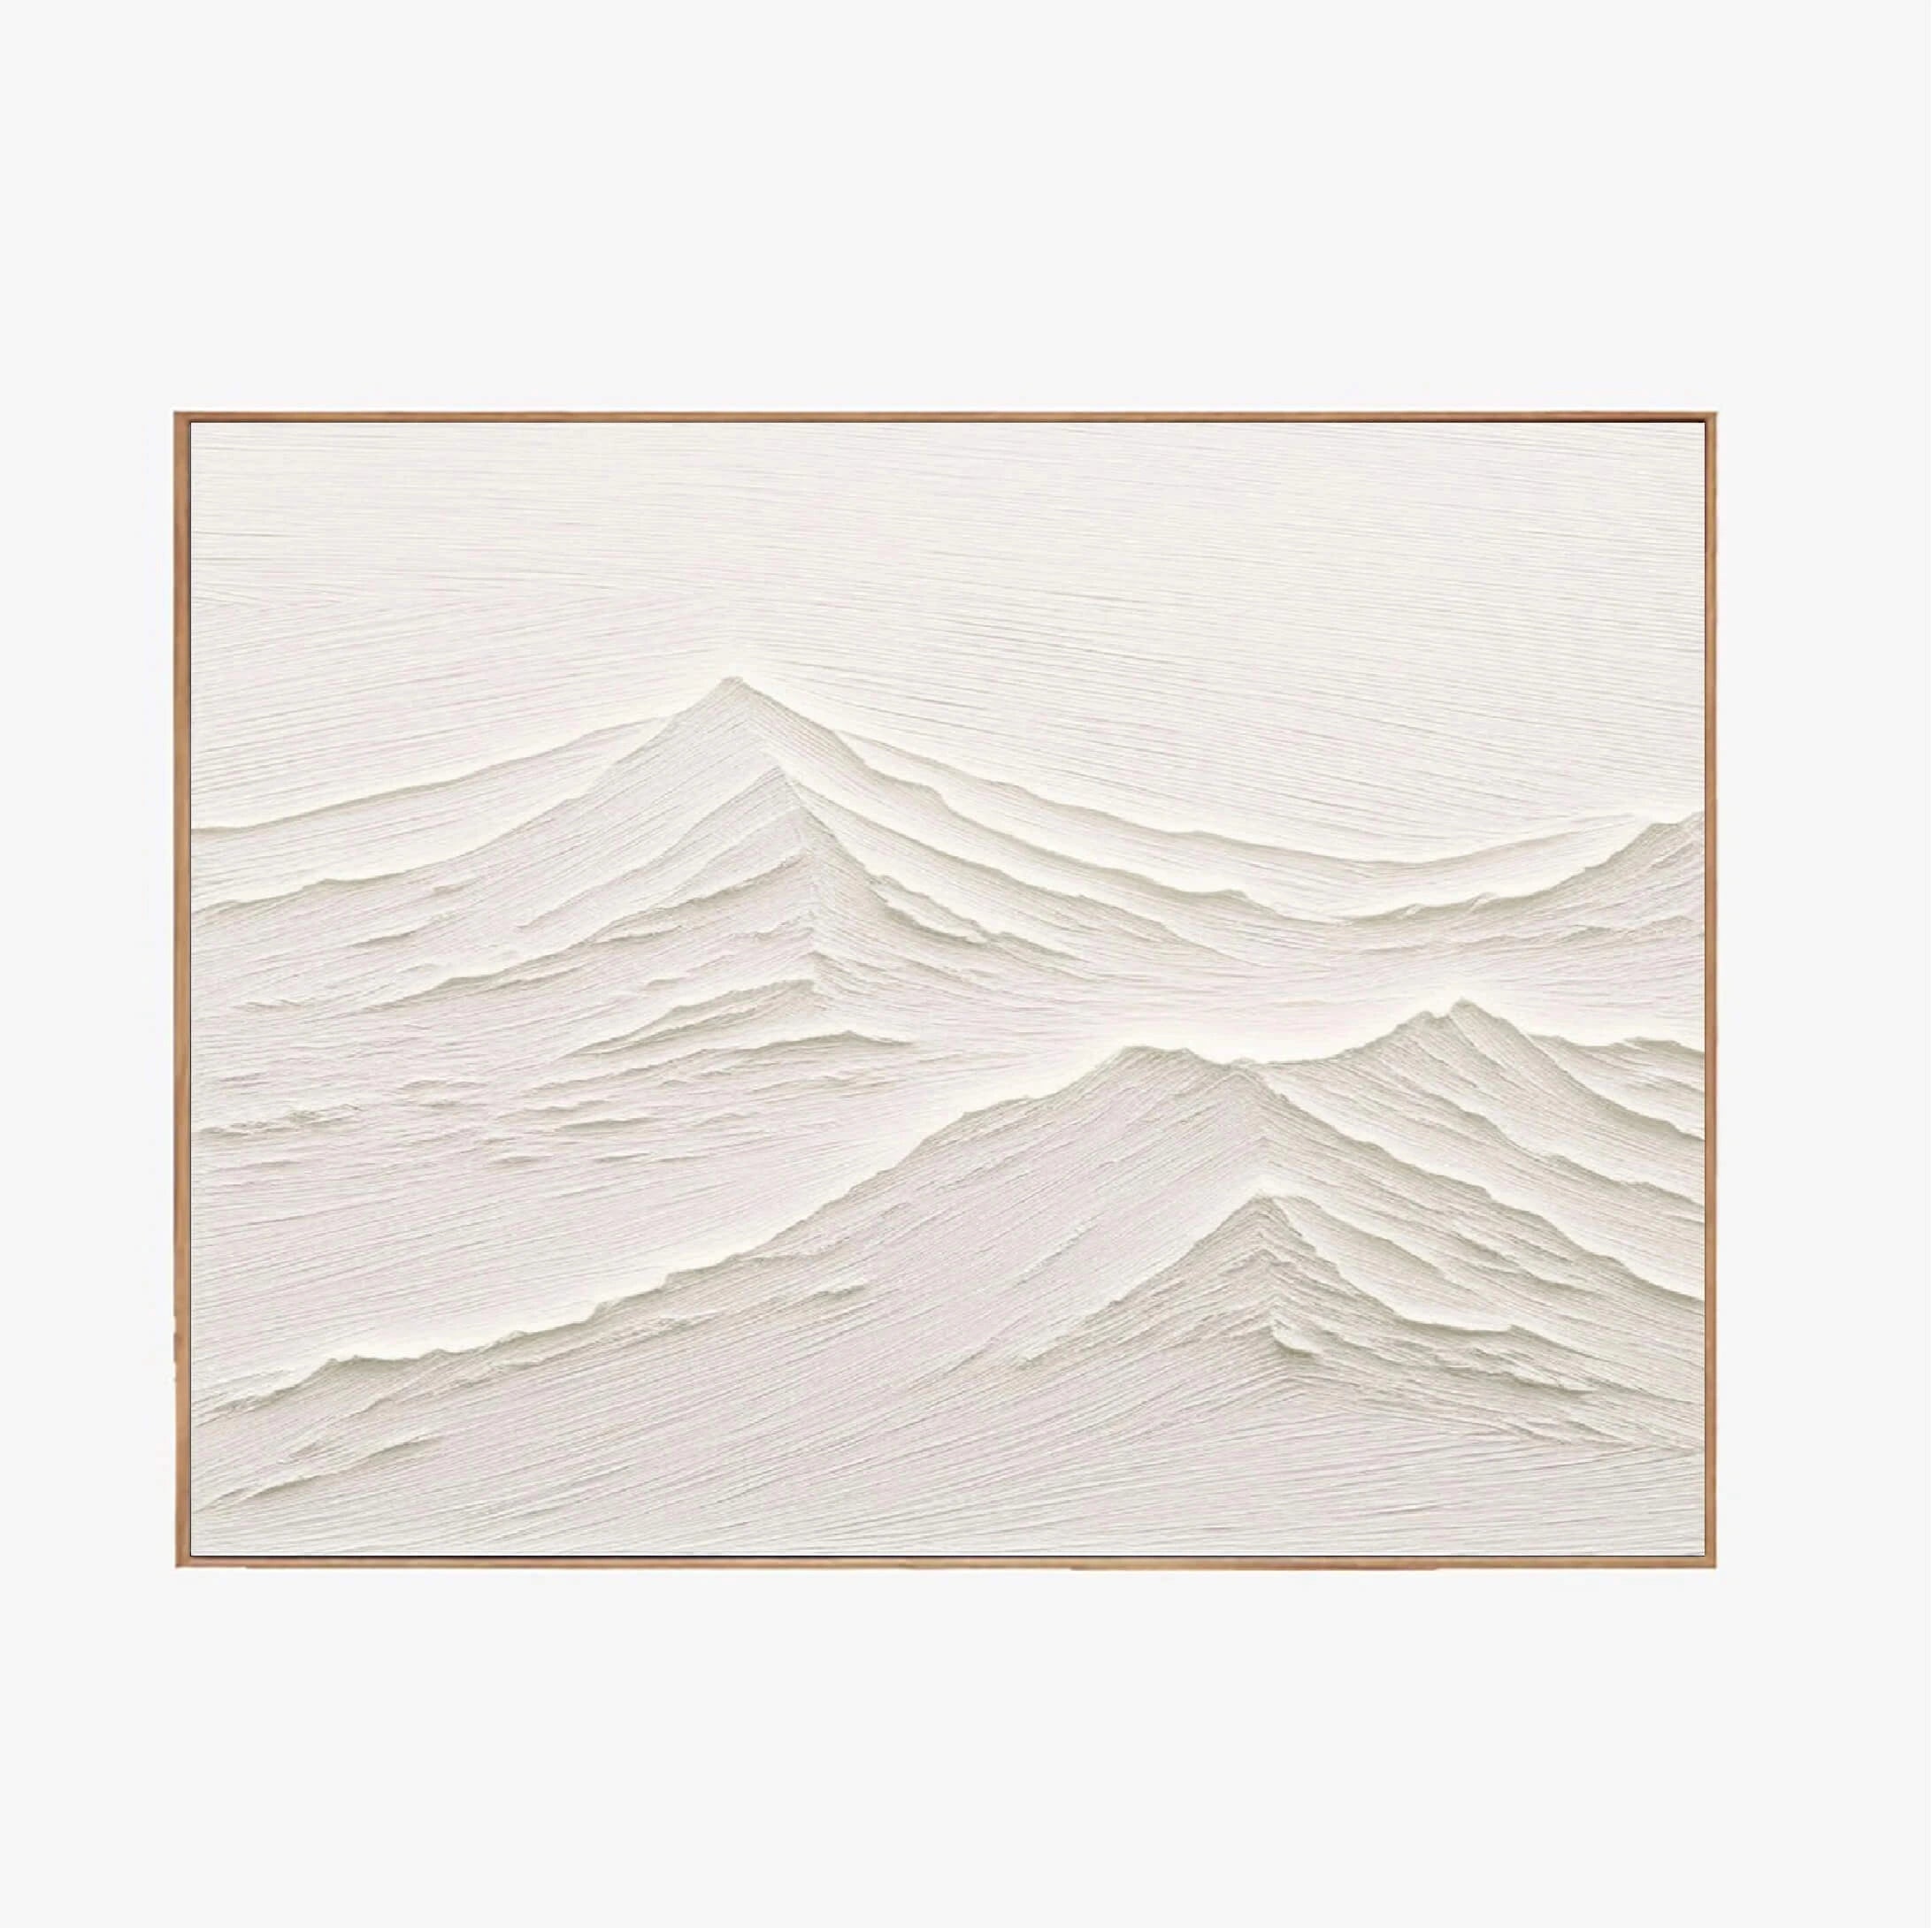 Hand-Painted Landscape Beige Plaster Art Framed Canvas Painting, Abstract Minimalist for Living Room